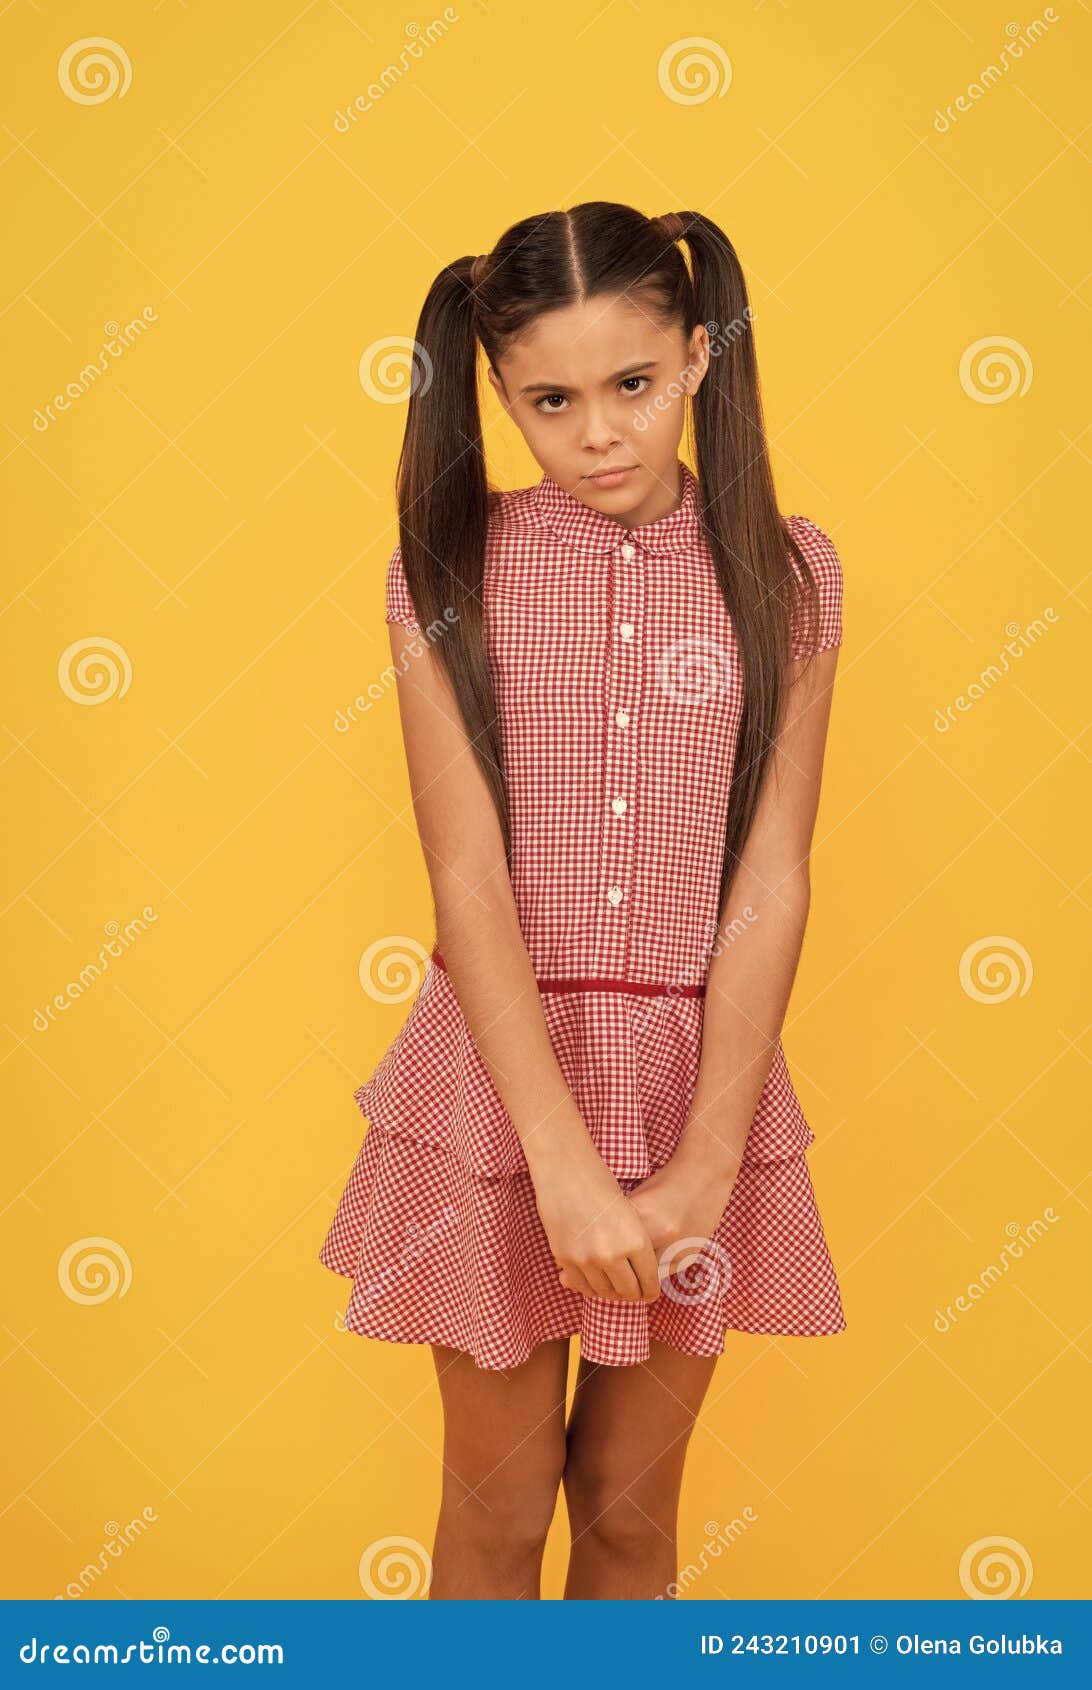 all the taste of being a girl. shy girl in dress yellow background. girlhood and childhood